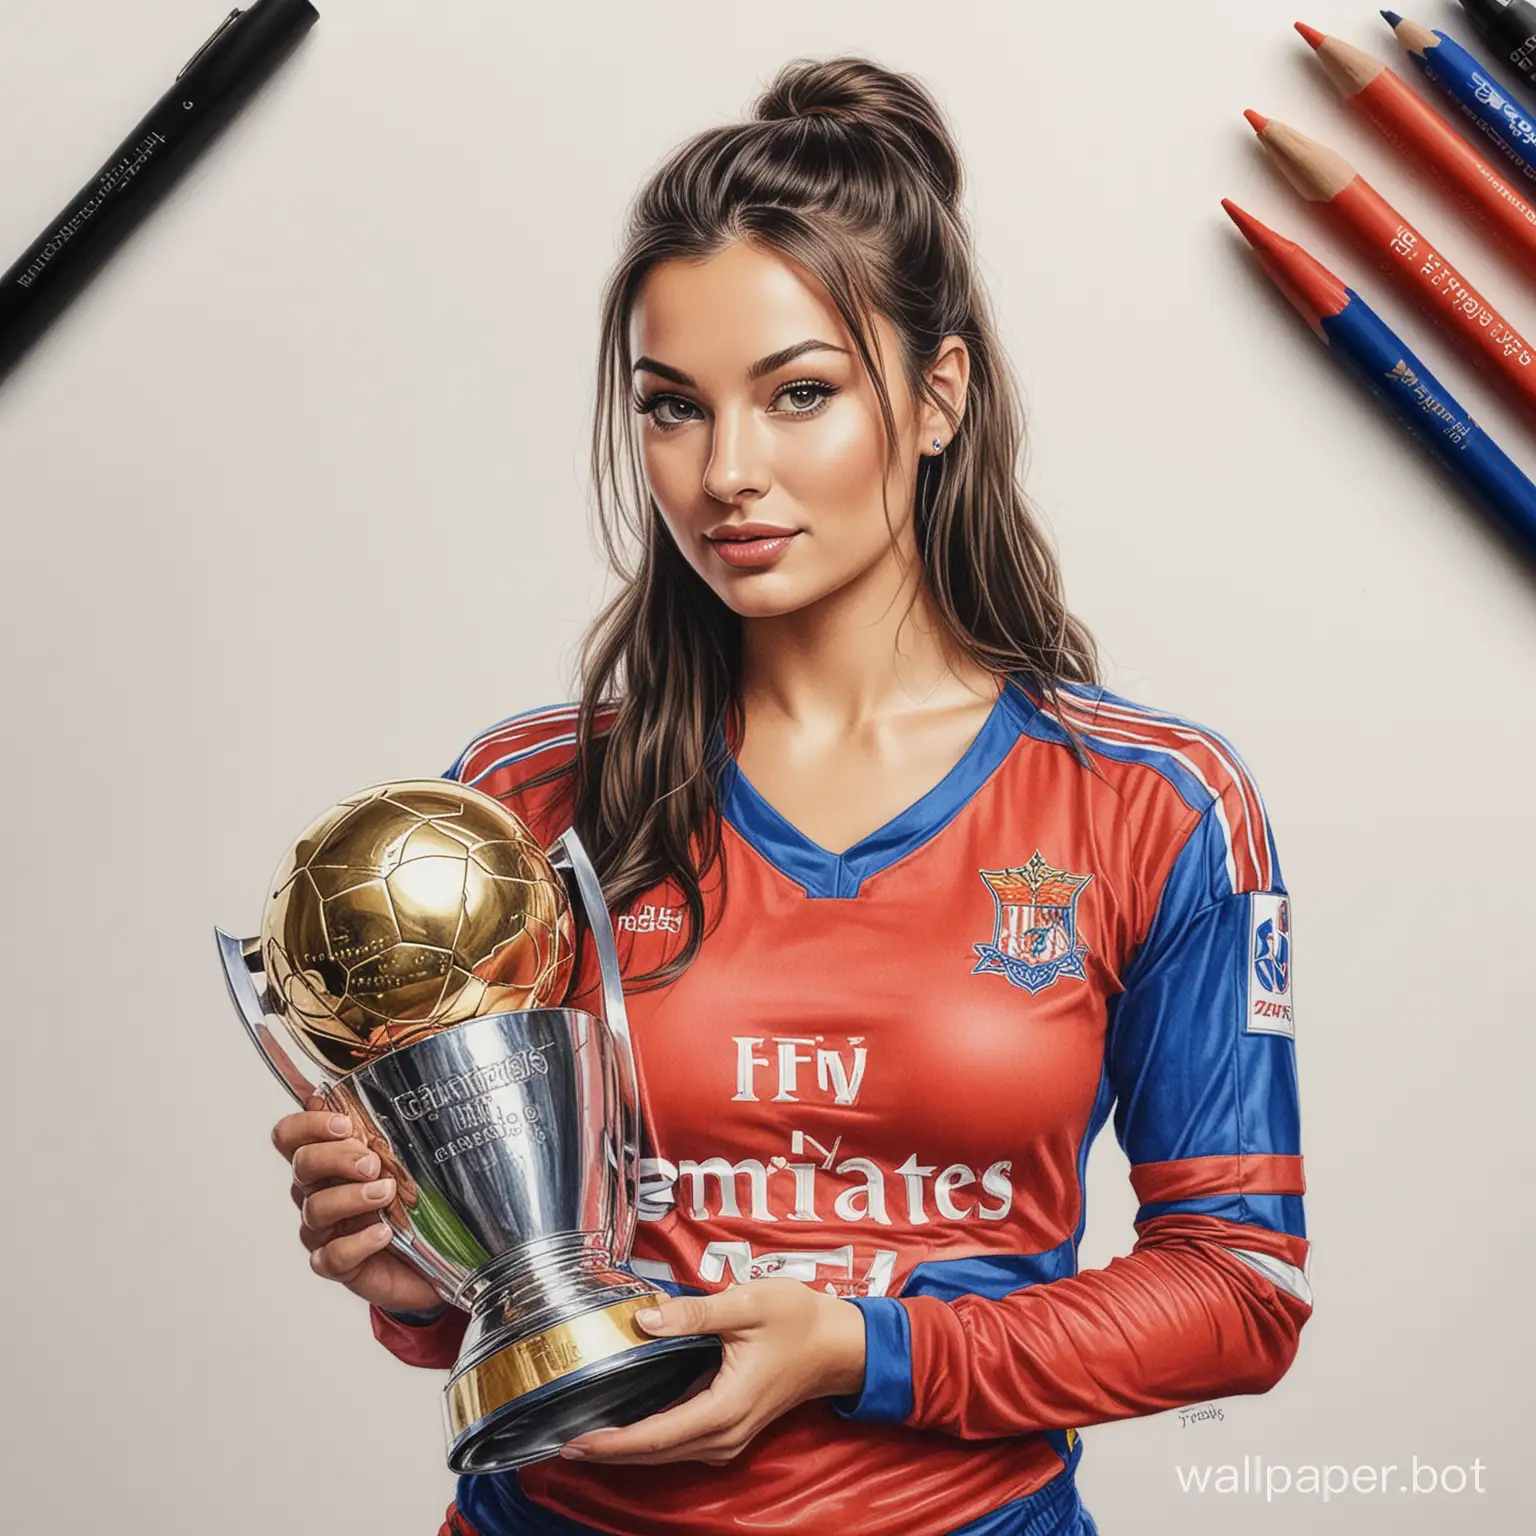 Young-DemiLeigh-Tebow-Holding-Champions-Cup-in-CSKA-Football-Uniform-Realistic-Marker-Drawing